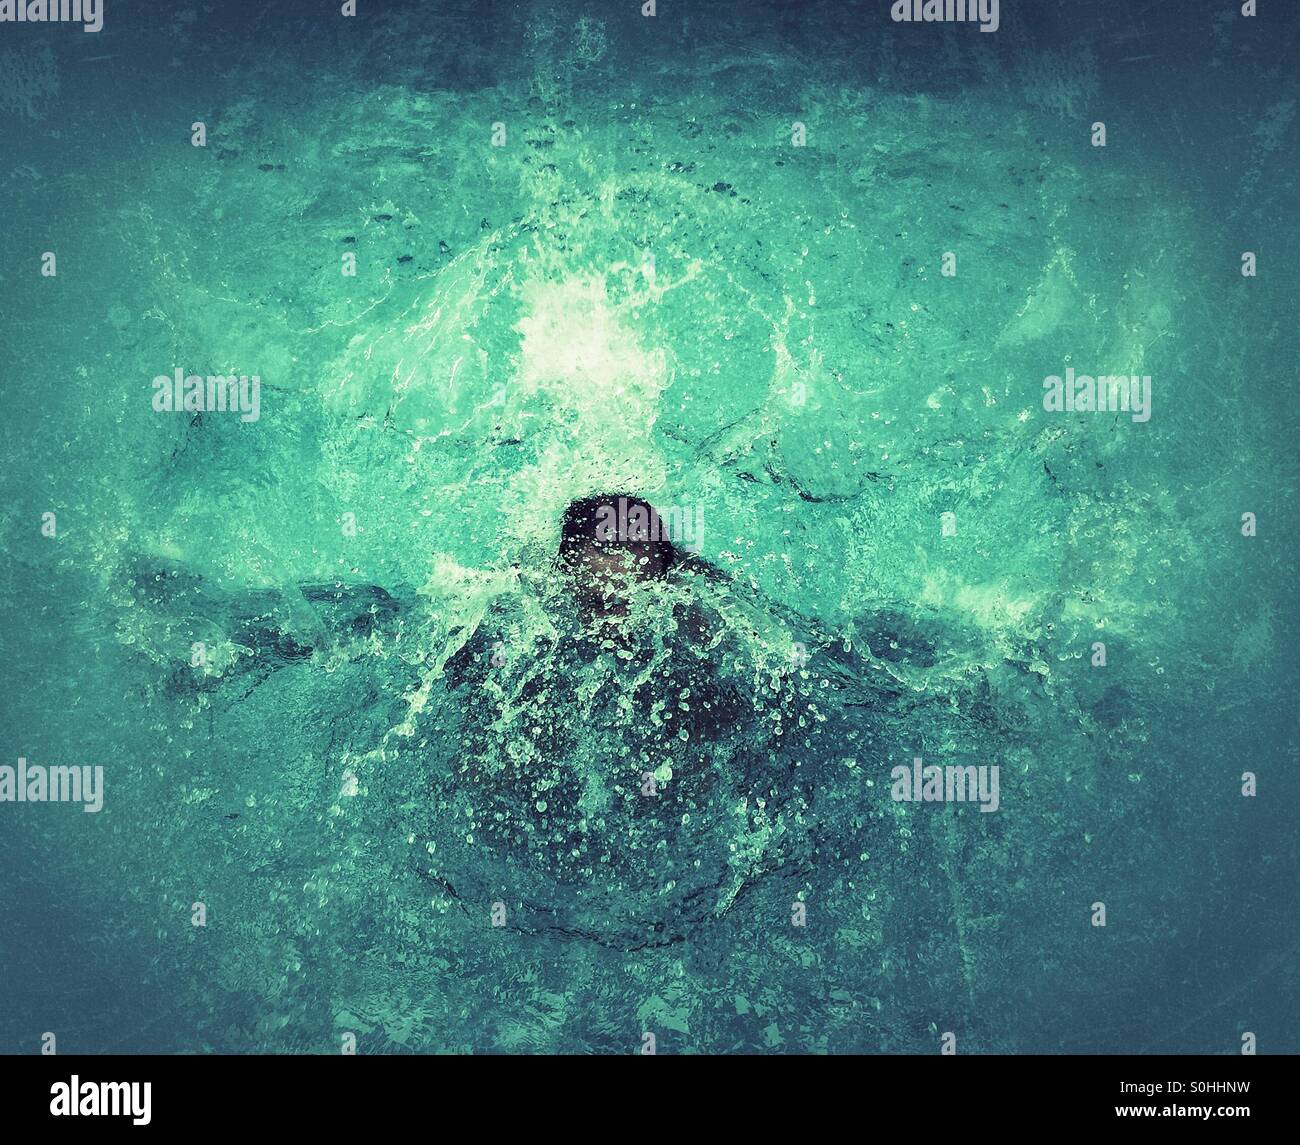 Man diving into a swimming pool Stock Photo